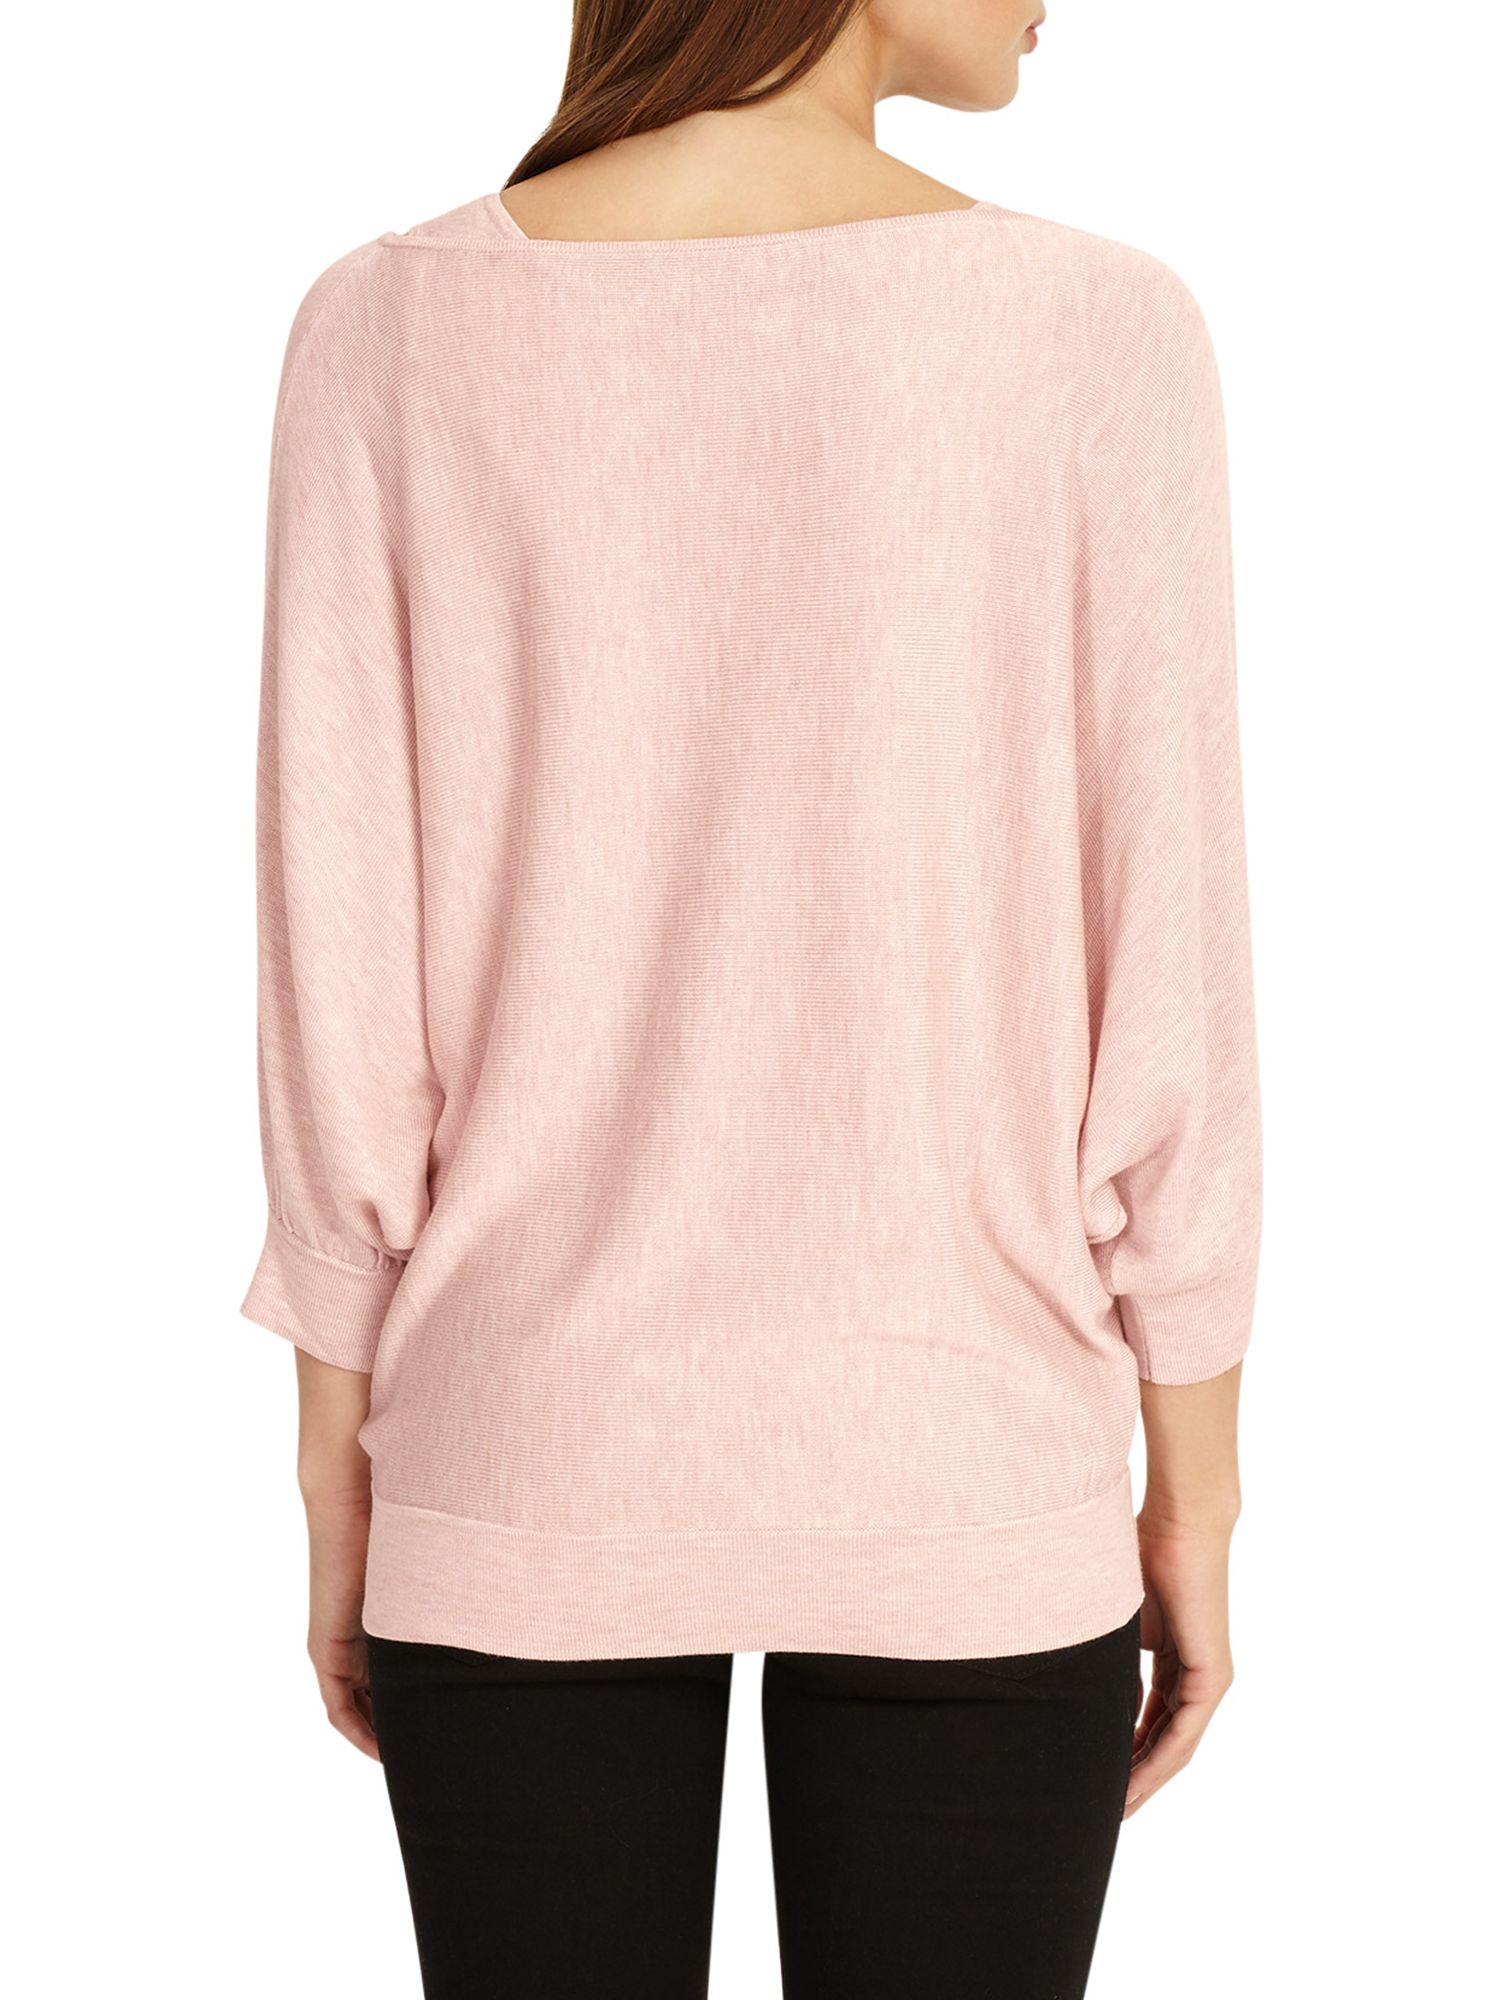 Phase Eight Agatha Double Layer Knitted Jumper, Cameo